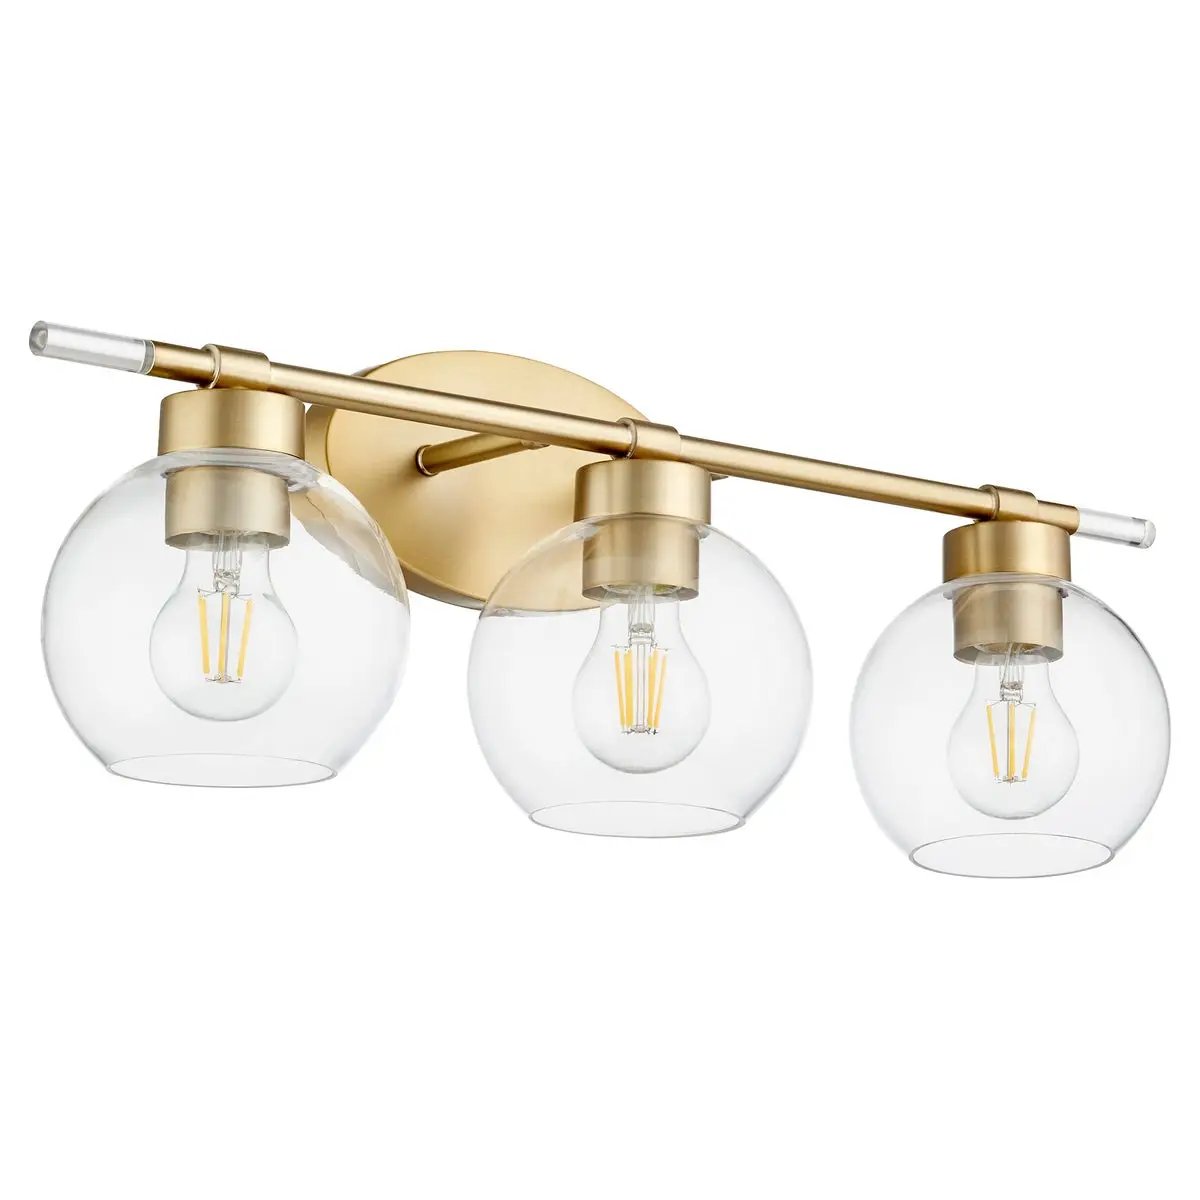 Transitional Vanity Light with clear glass bulbs, rounded silhouettes, and aged brass finish. Elevate your space with this mid-century inspired fixture from Quorum International. Perfect for any setting.